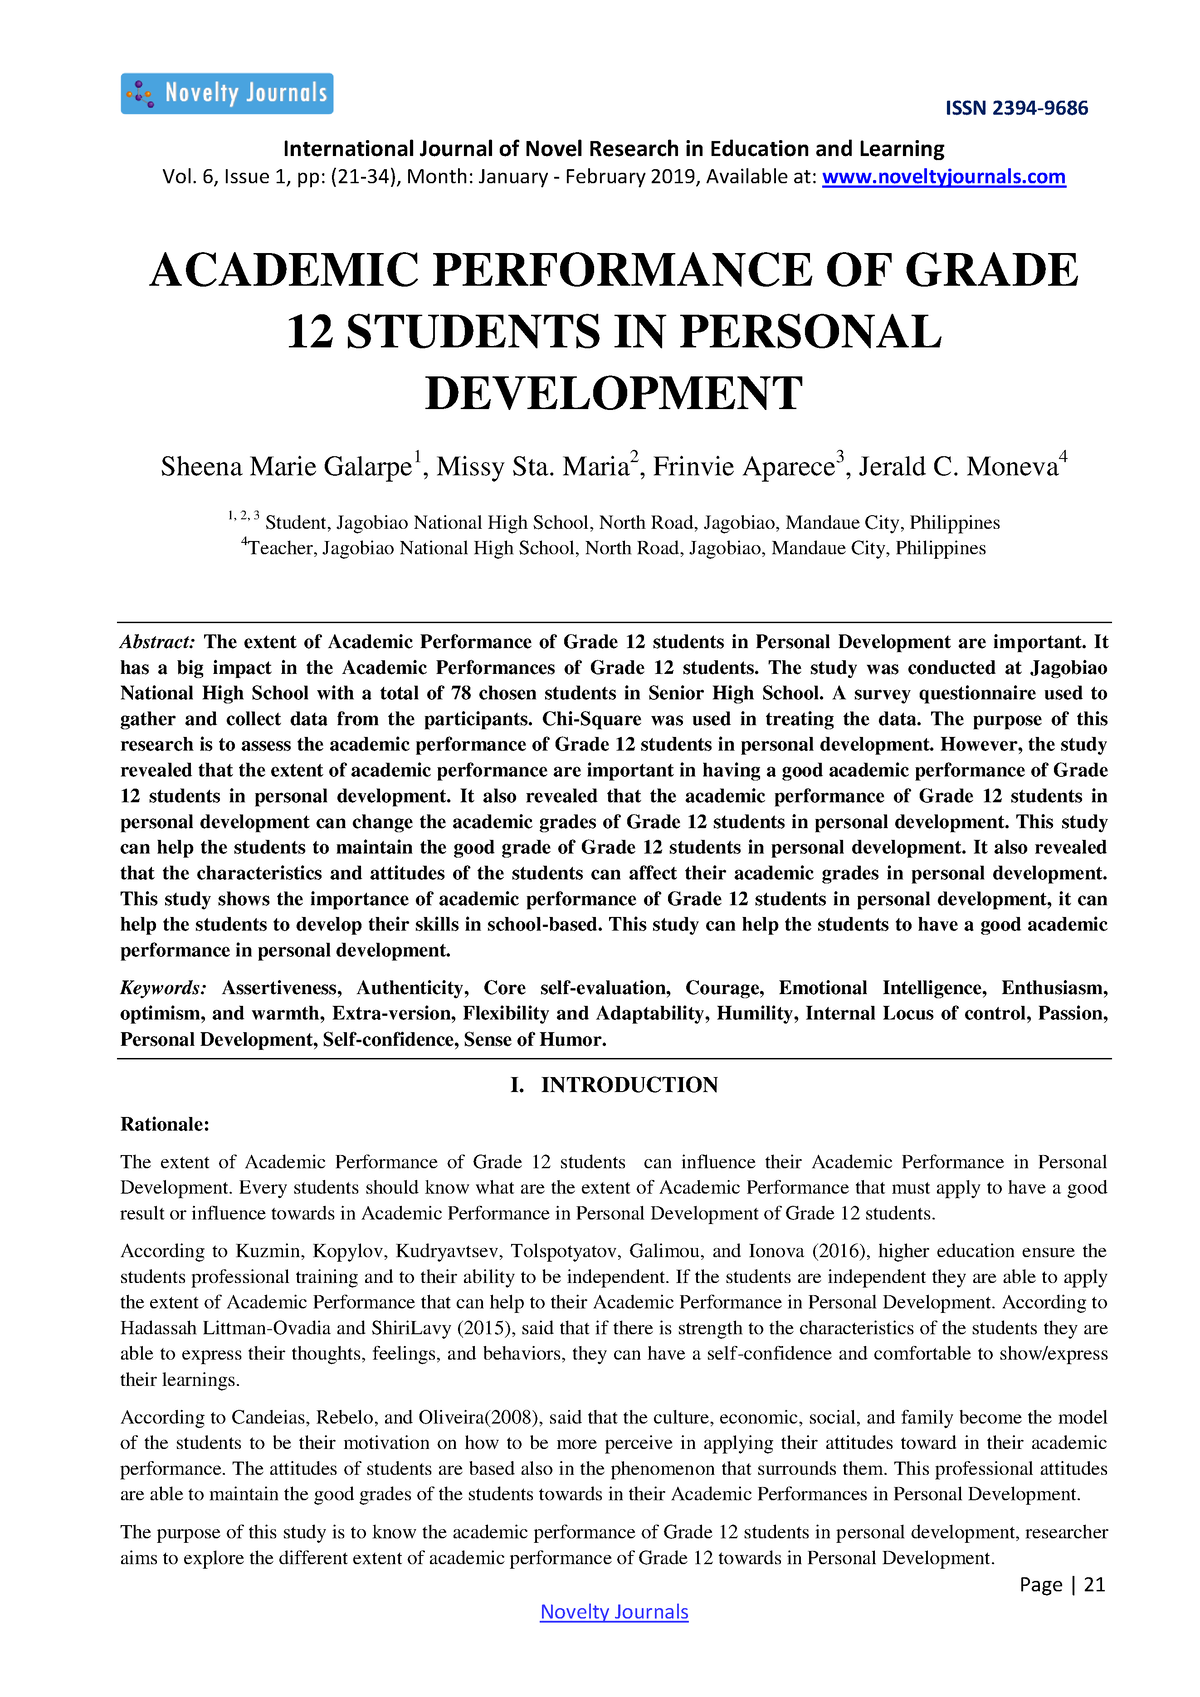 literature review of students academic performance